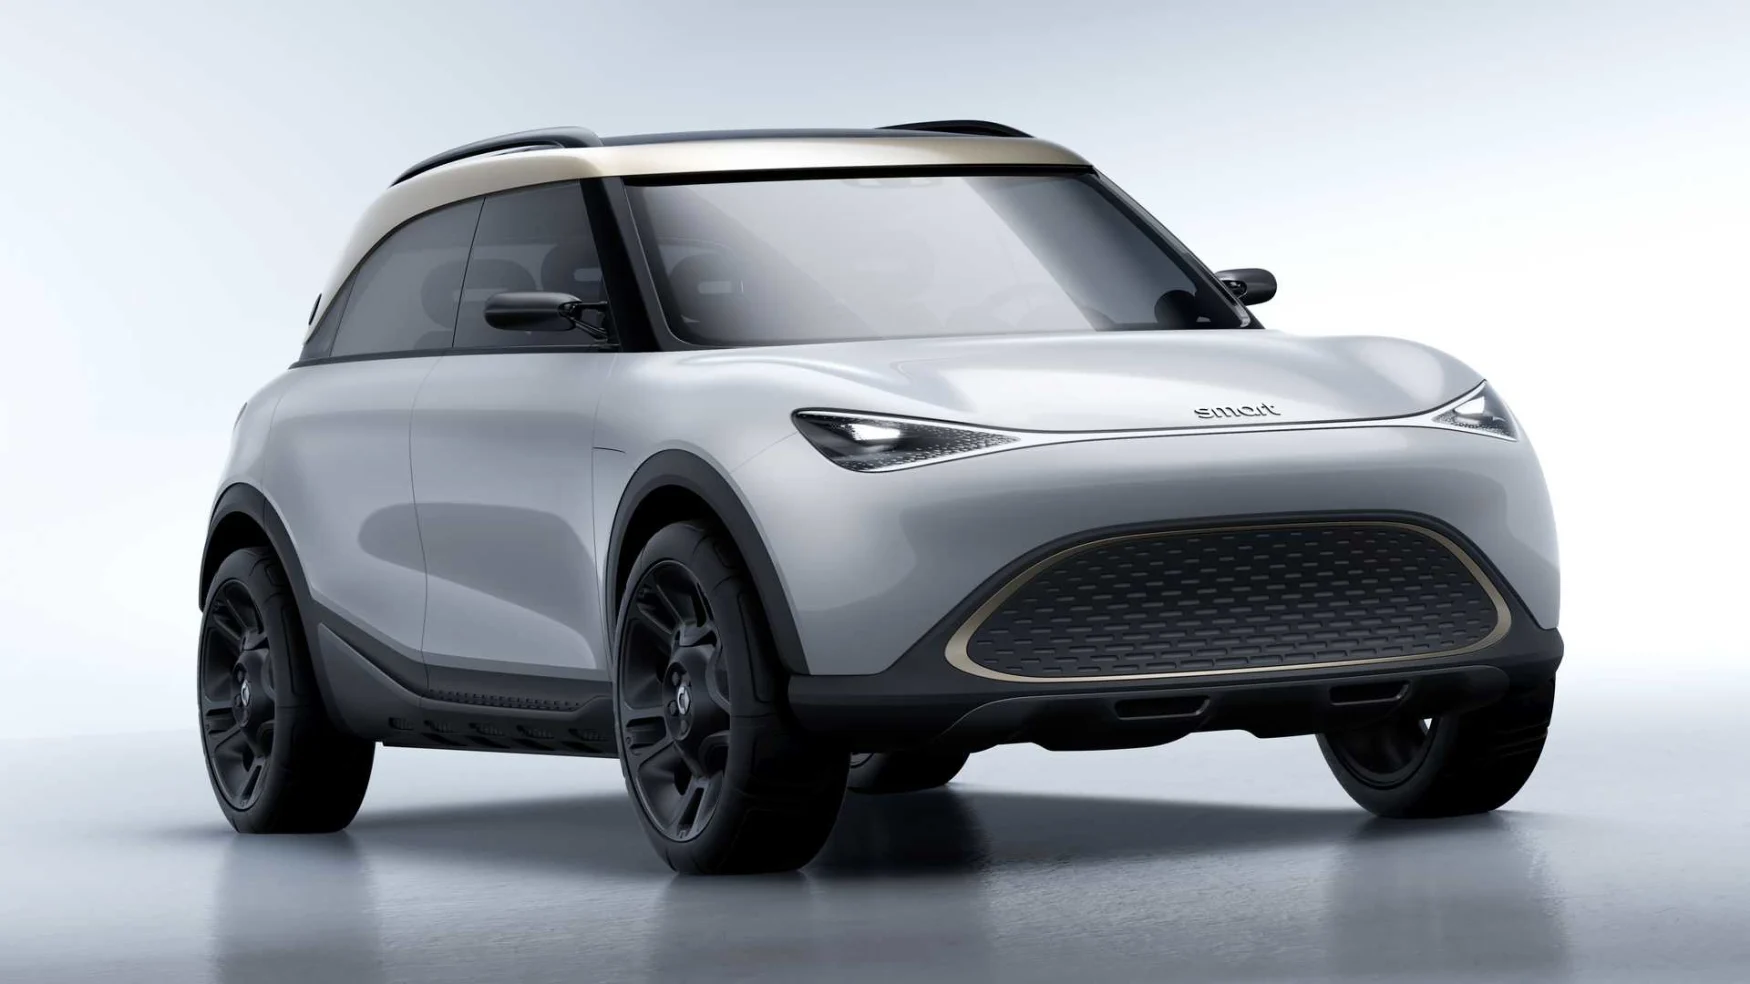 Smart's Mini-like EV concept shows off its larger vehicle ambitions